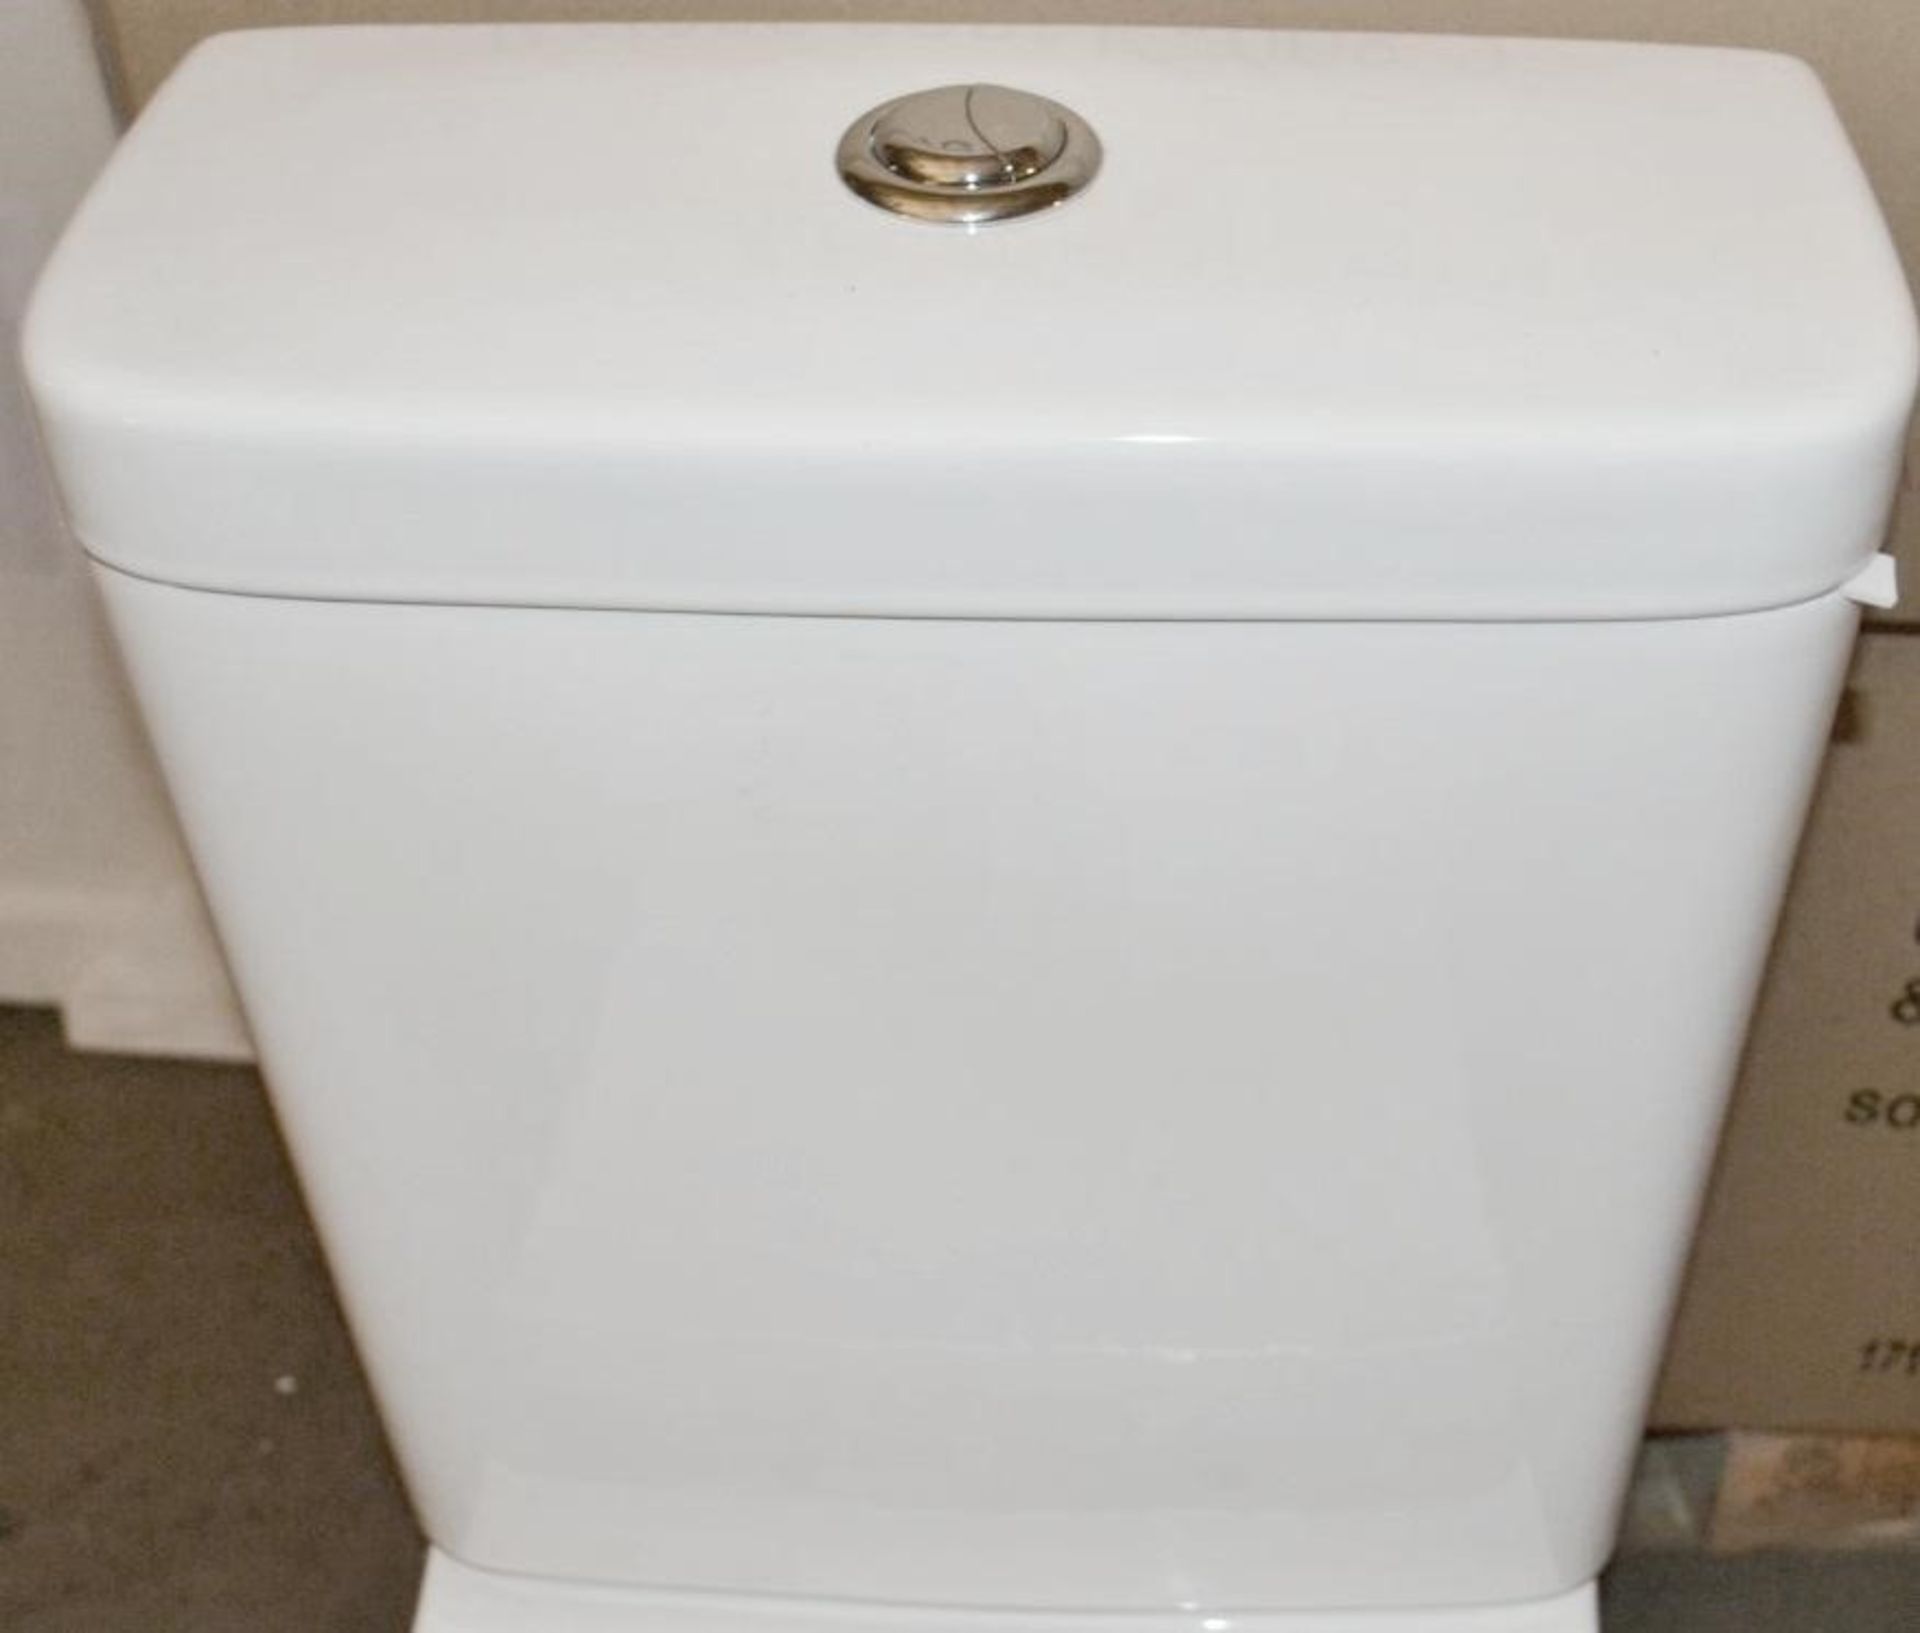 1 x Close Coupled Toilet Pan With Soft Close Toilet Seat And Cistern (Inc. Fittings) - Brand New Box - Image 6 of 12